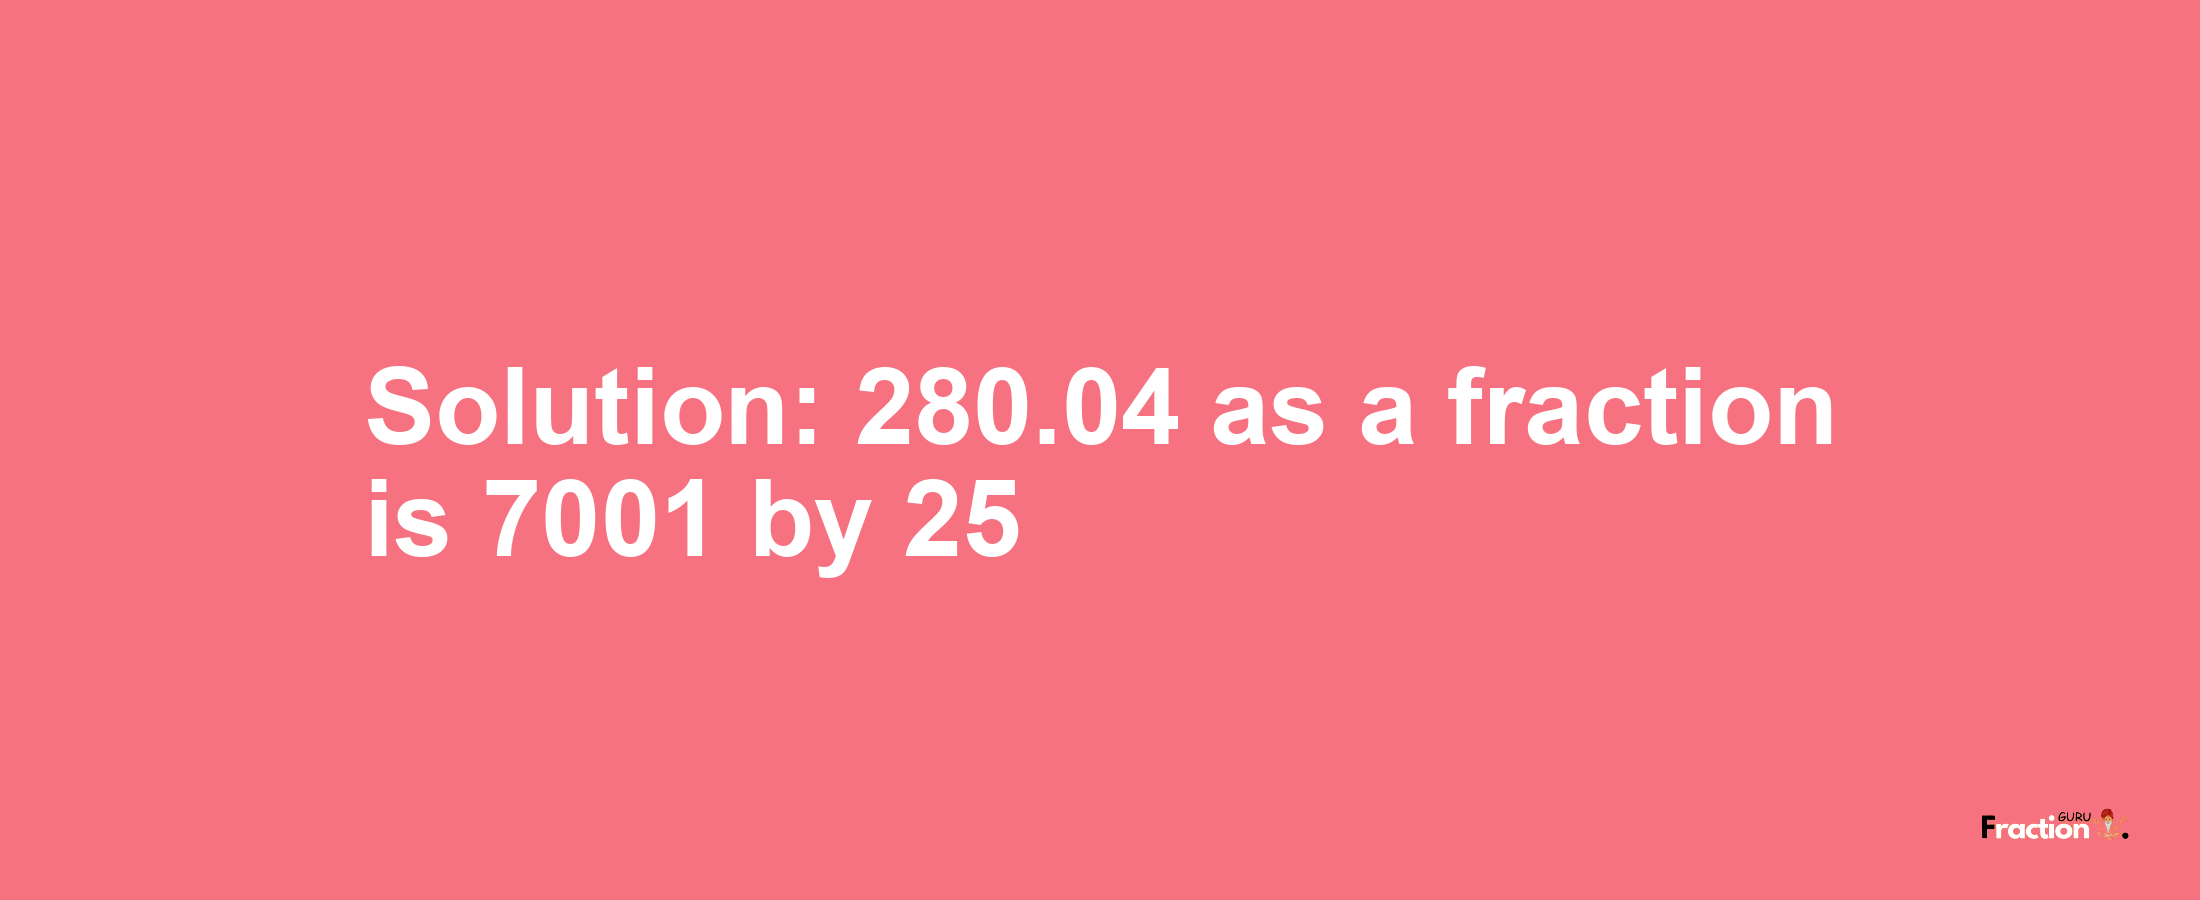 Solution:280.04 as a fraction is 7001/25